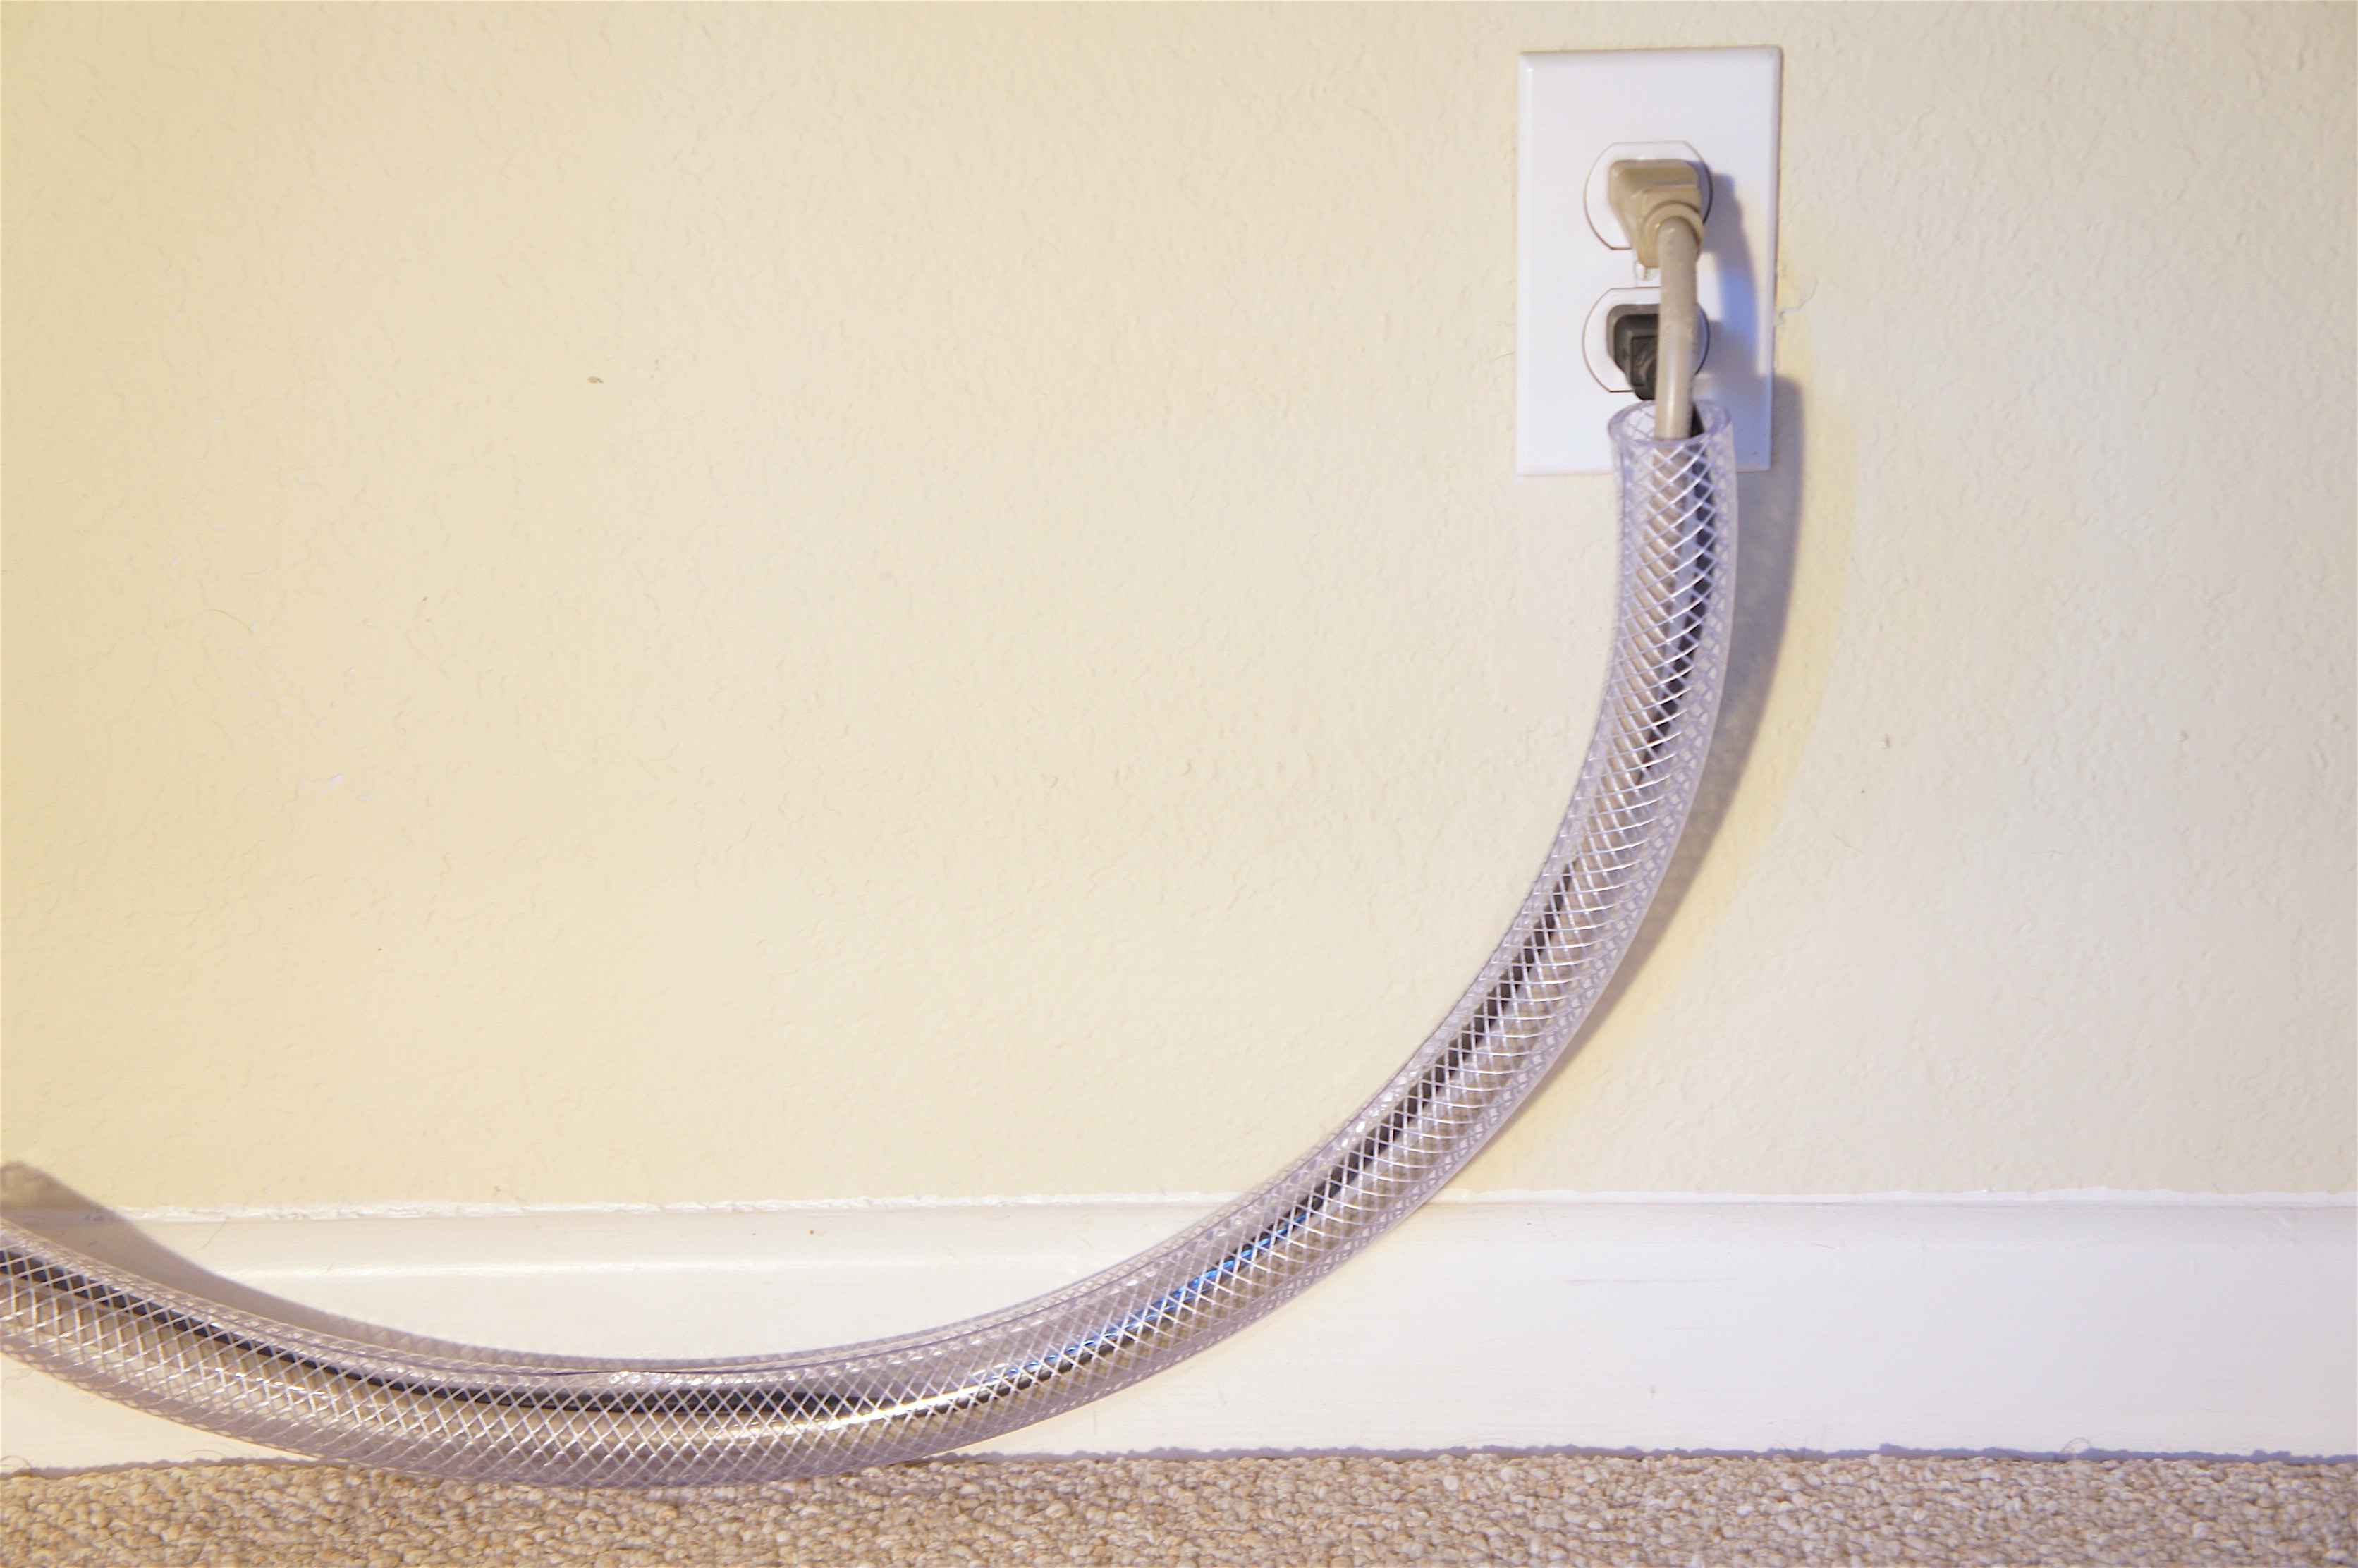 Hide cords in plastic tubing after